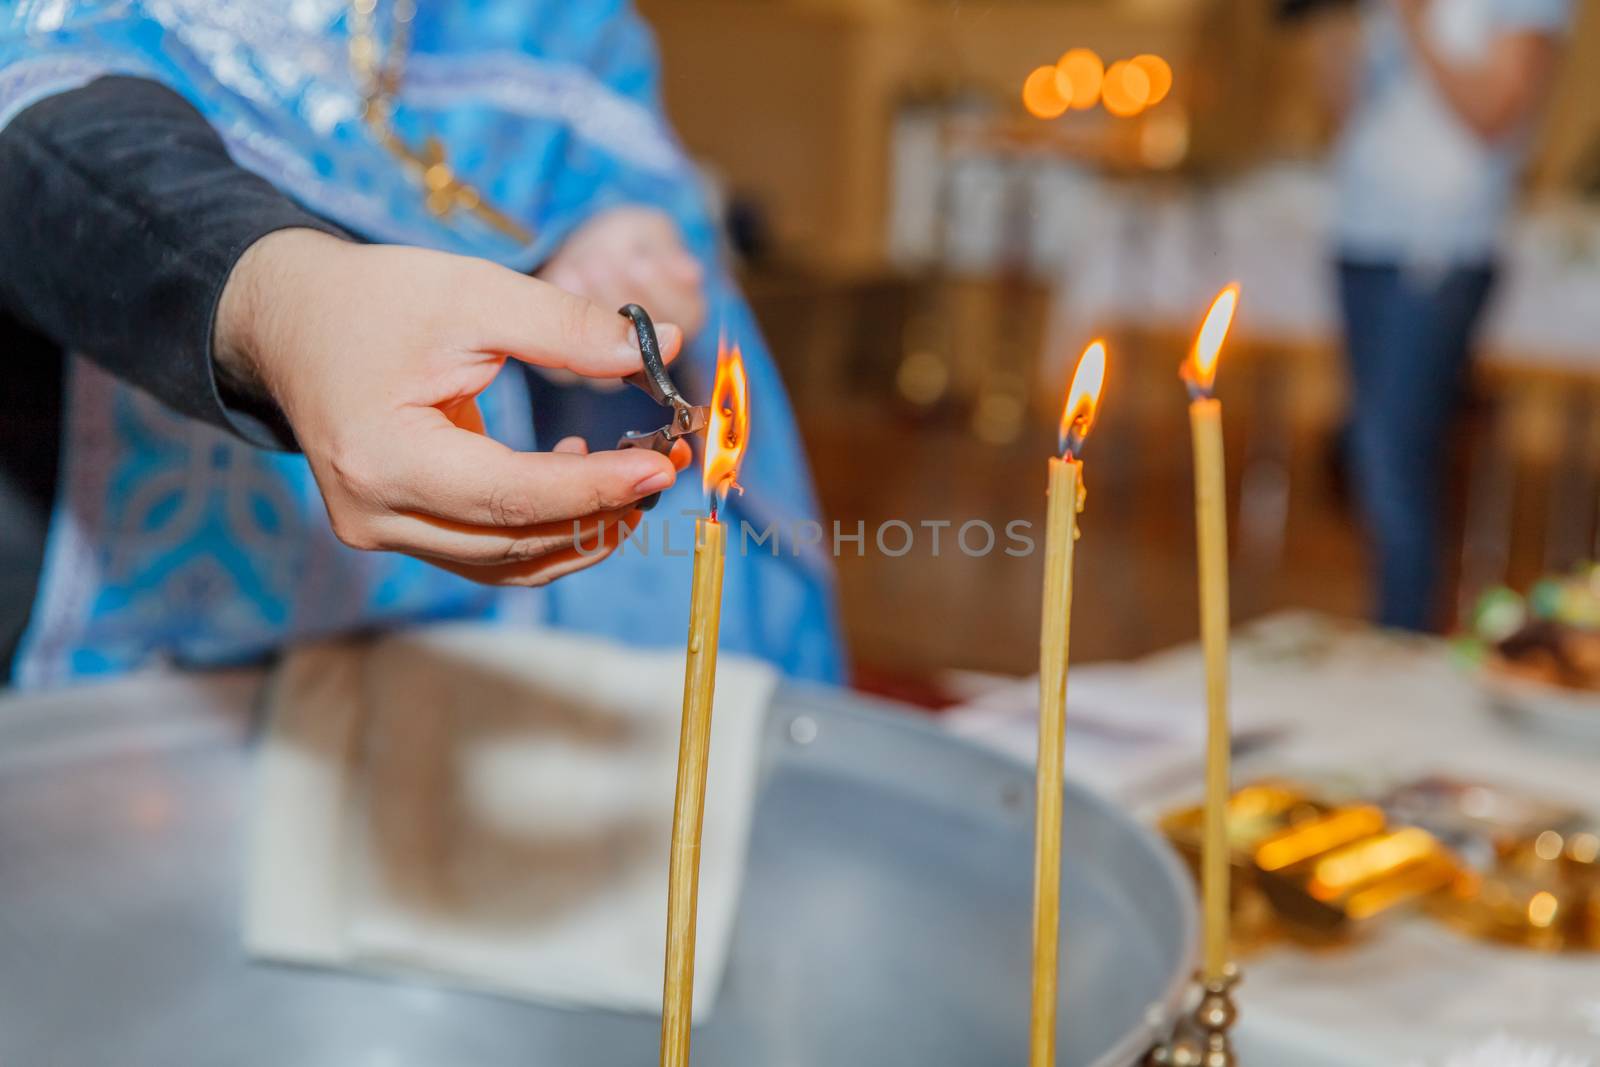 Priest burning hair in candle flame in church by Angel_a